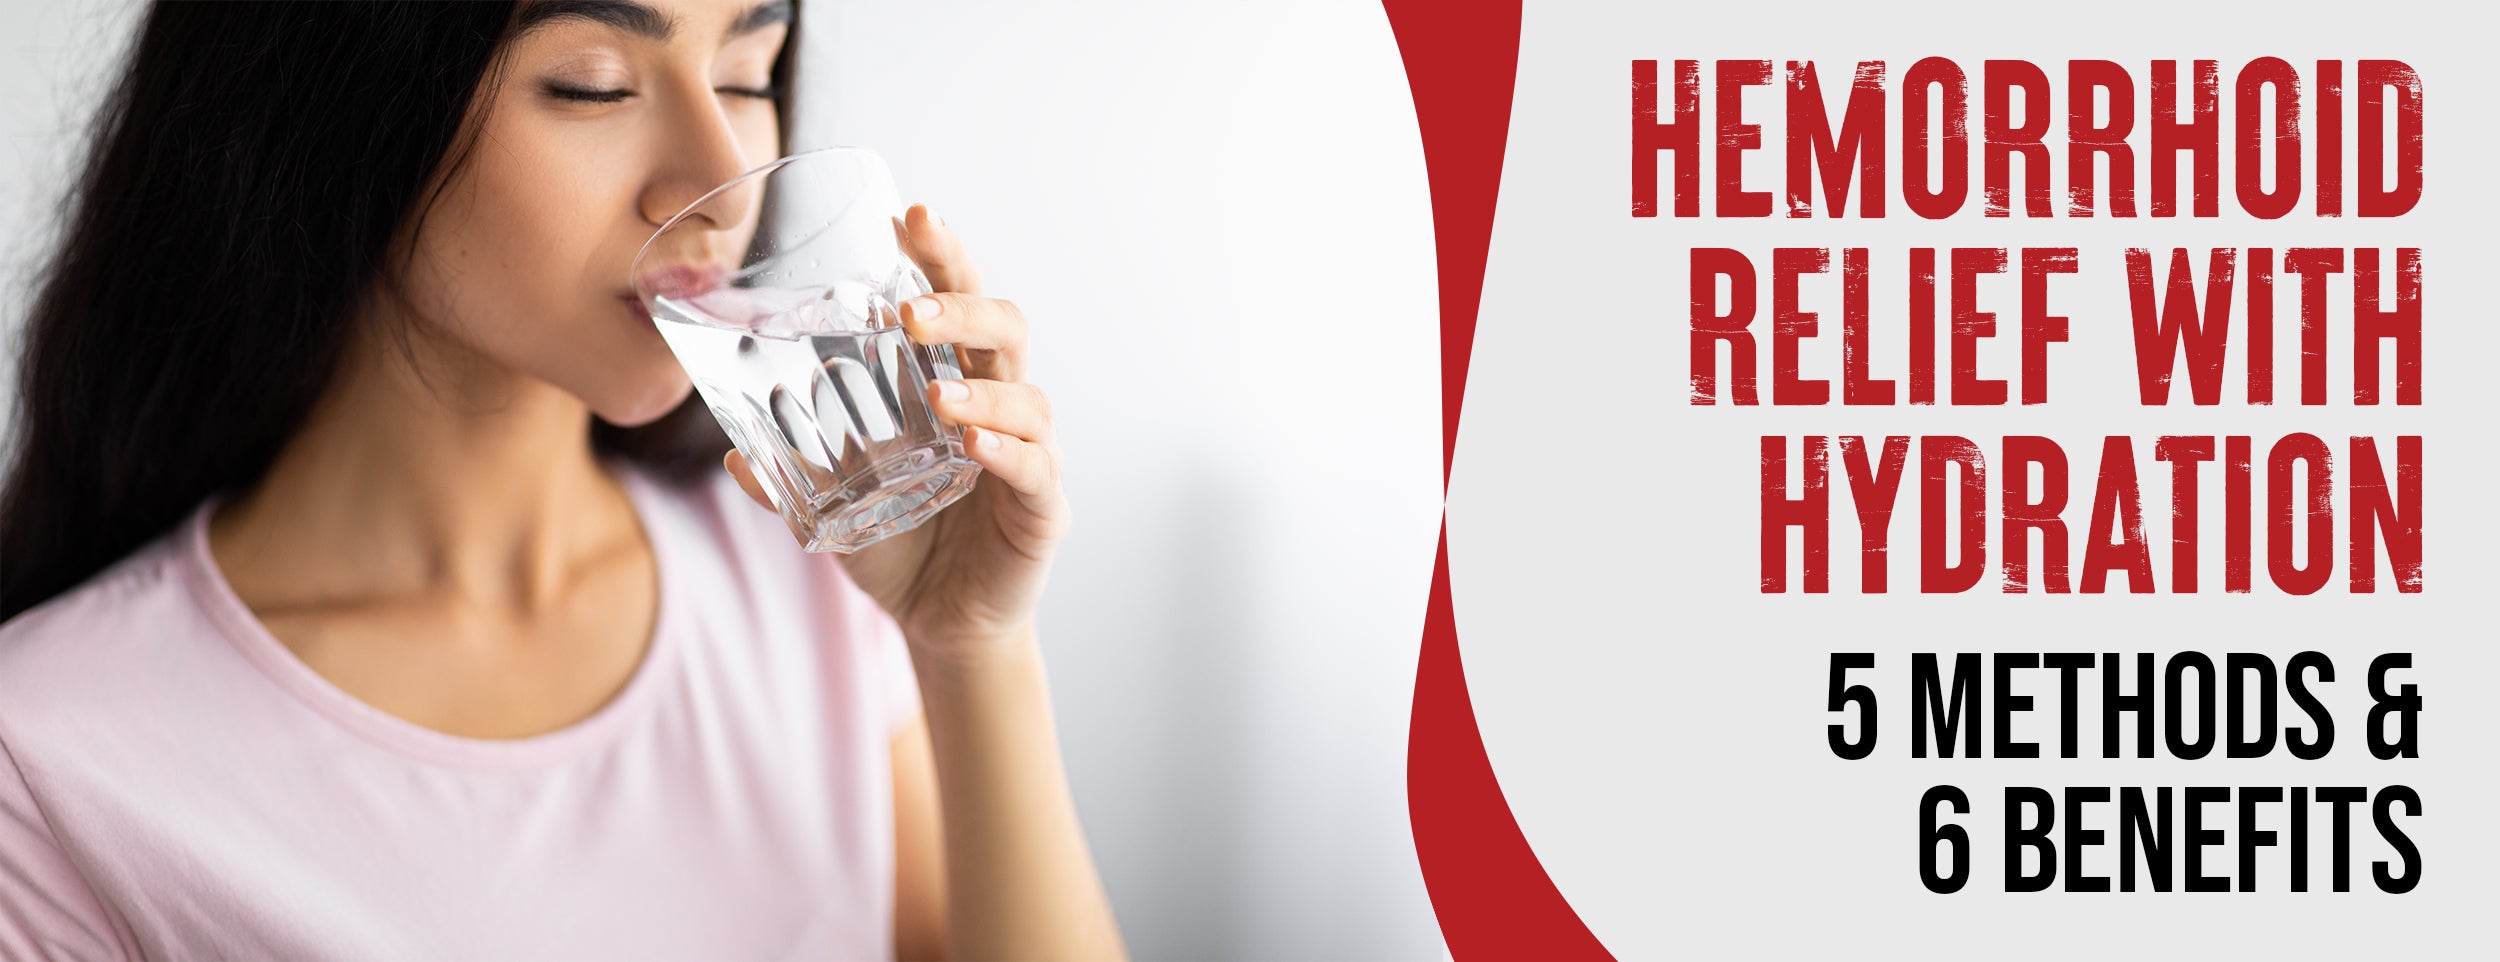 5 methods and benefits of hemorrhoids relief with hydration